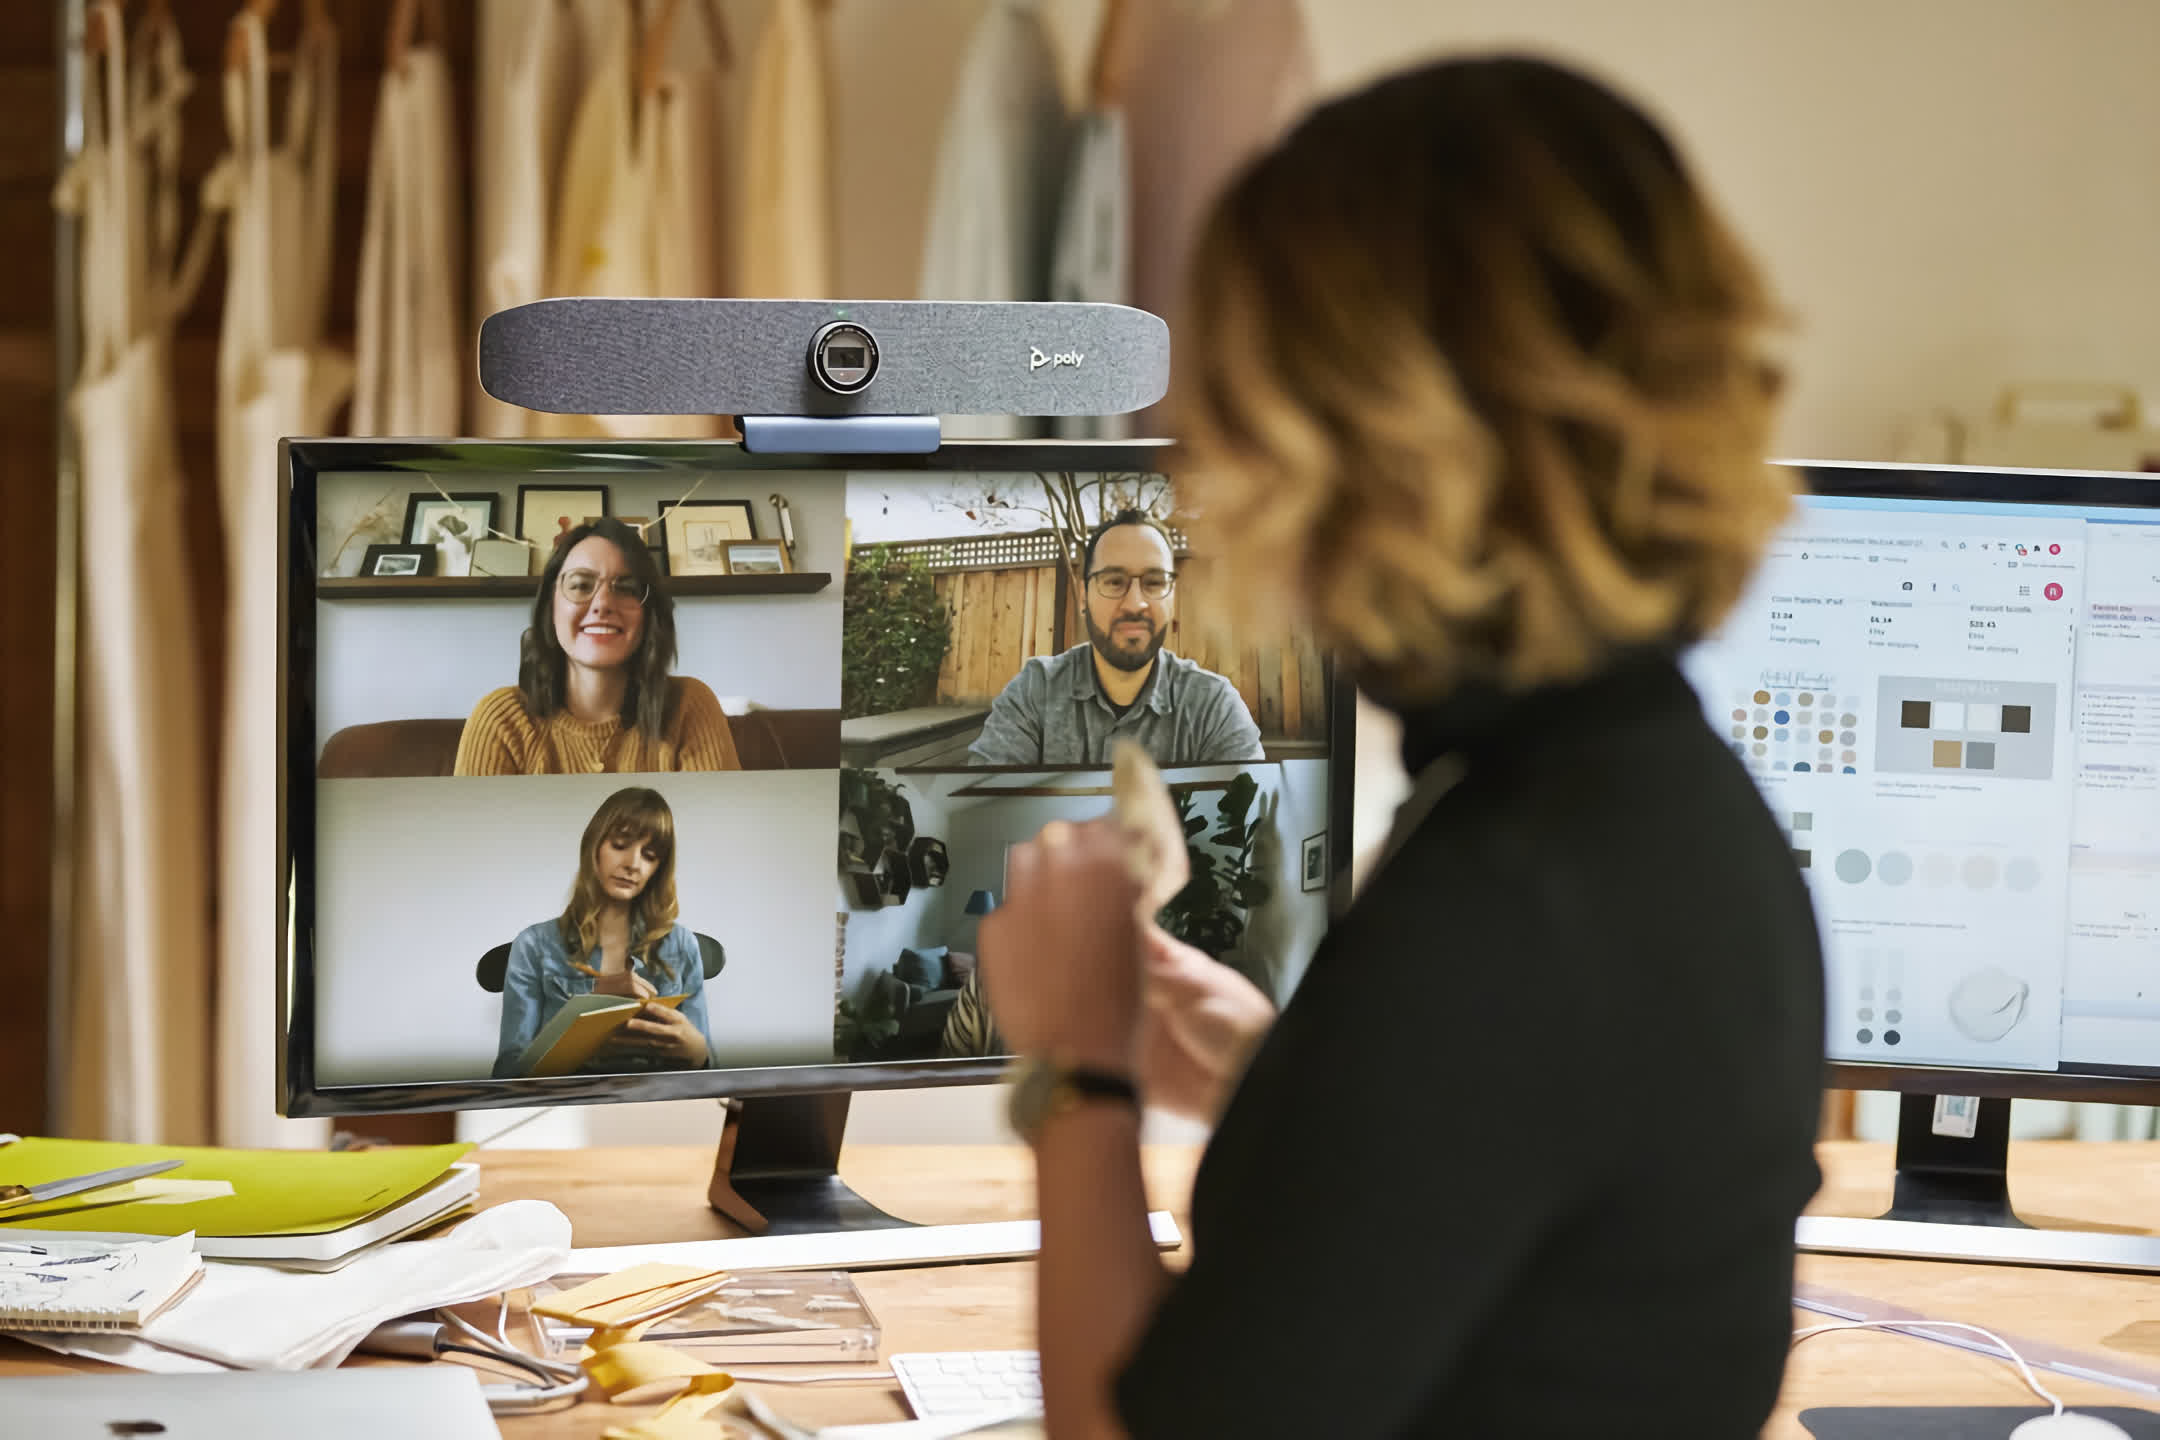 Poly shows off high-res webcams, video conferencing monitor, and services